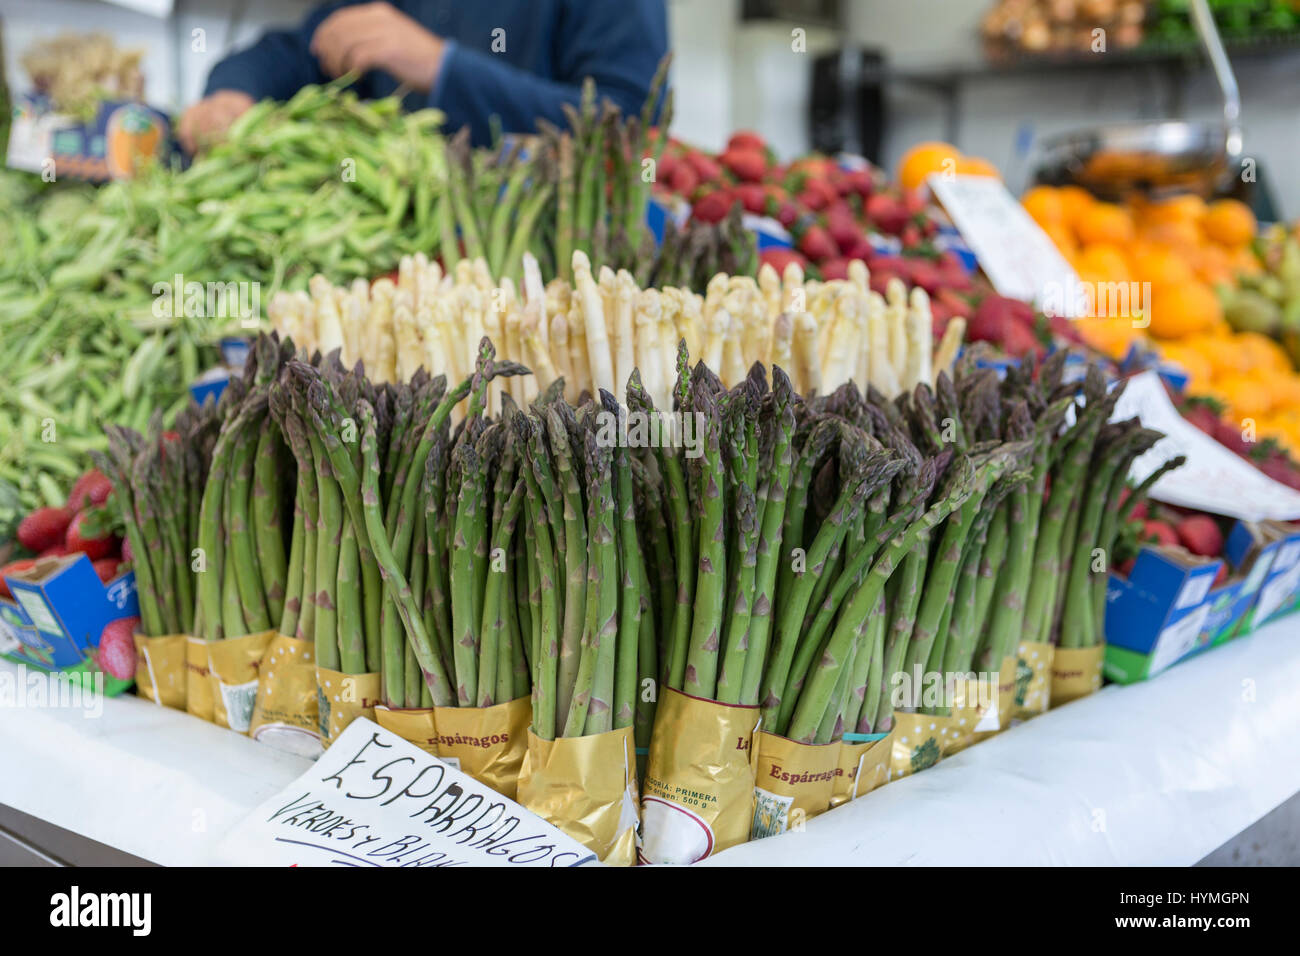 Farmers' food market stall with variety of organic vegetable, Cadiz, Spain Stock Photo